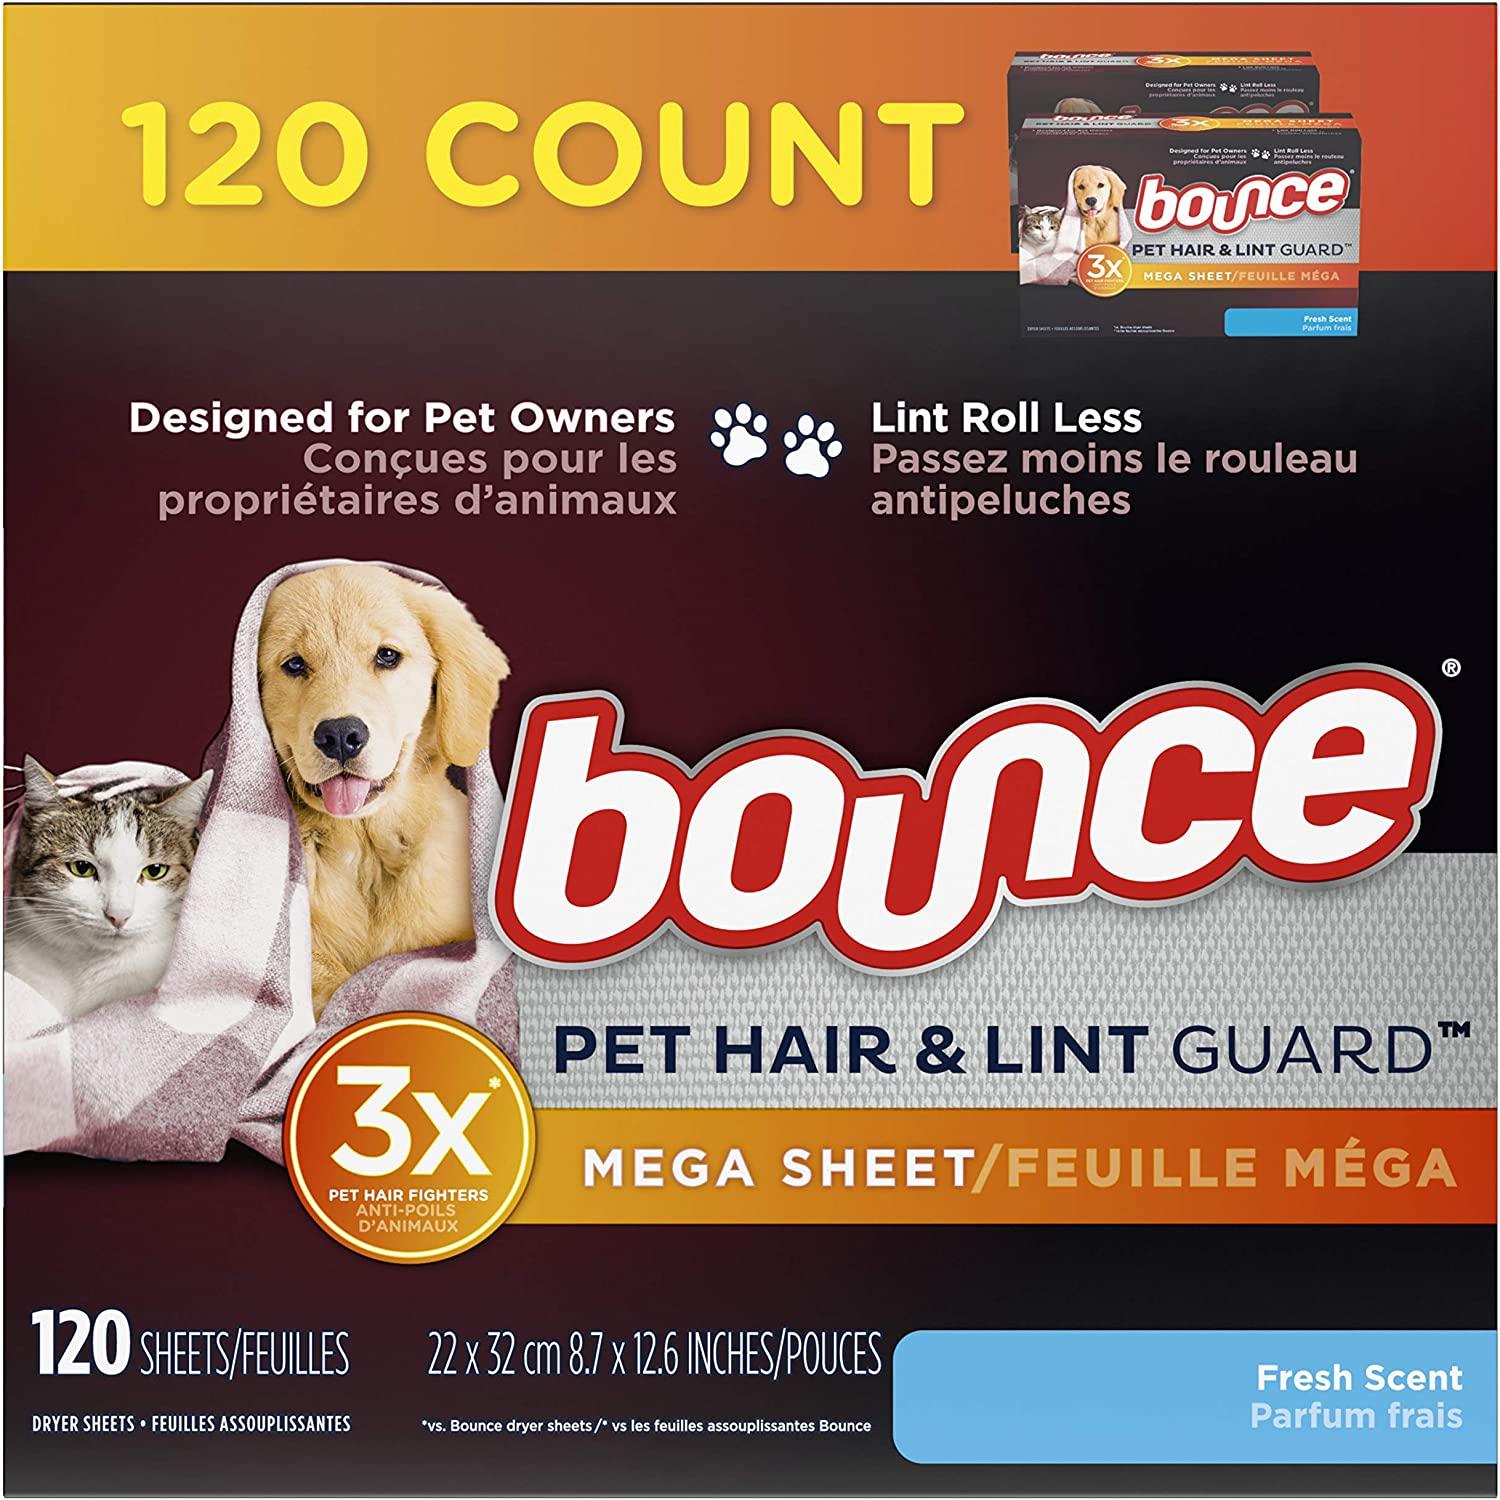 120 Bounce Pet Hair and Lint Guard Mega Dryer Sheets for $5.69 Shipped